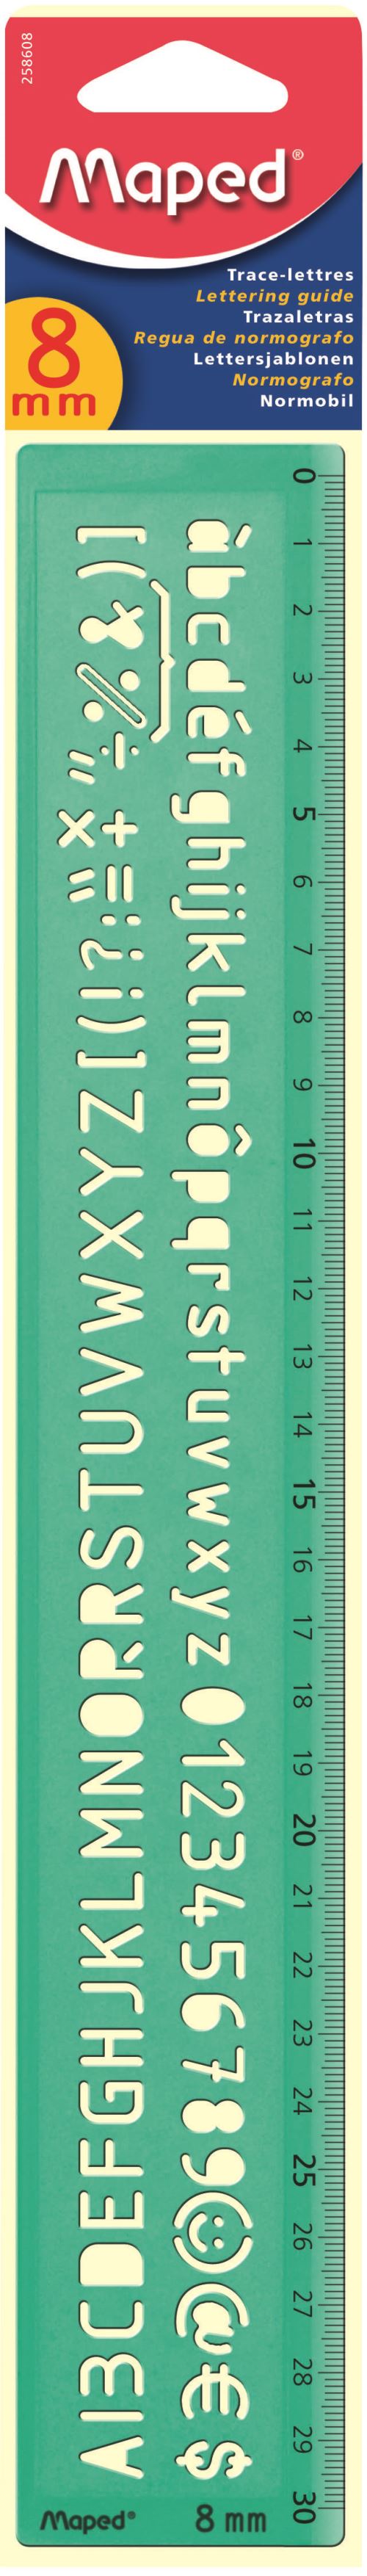 Maped, Règle, Trace lettres, 8mm, Vert, 258608